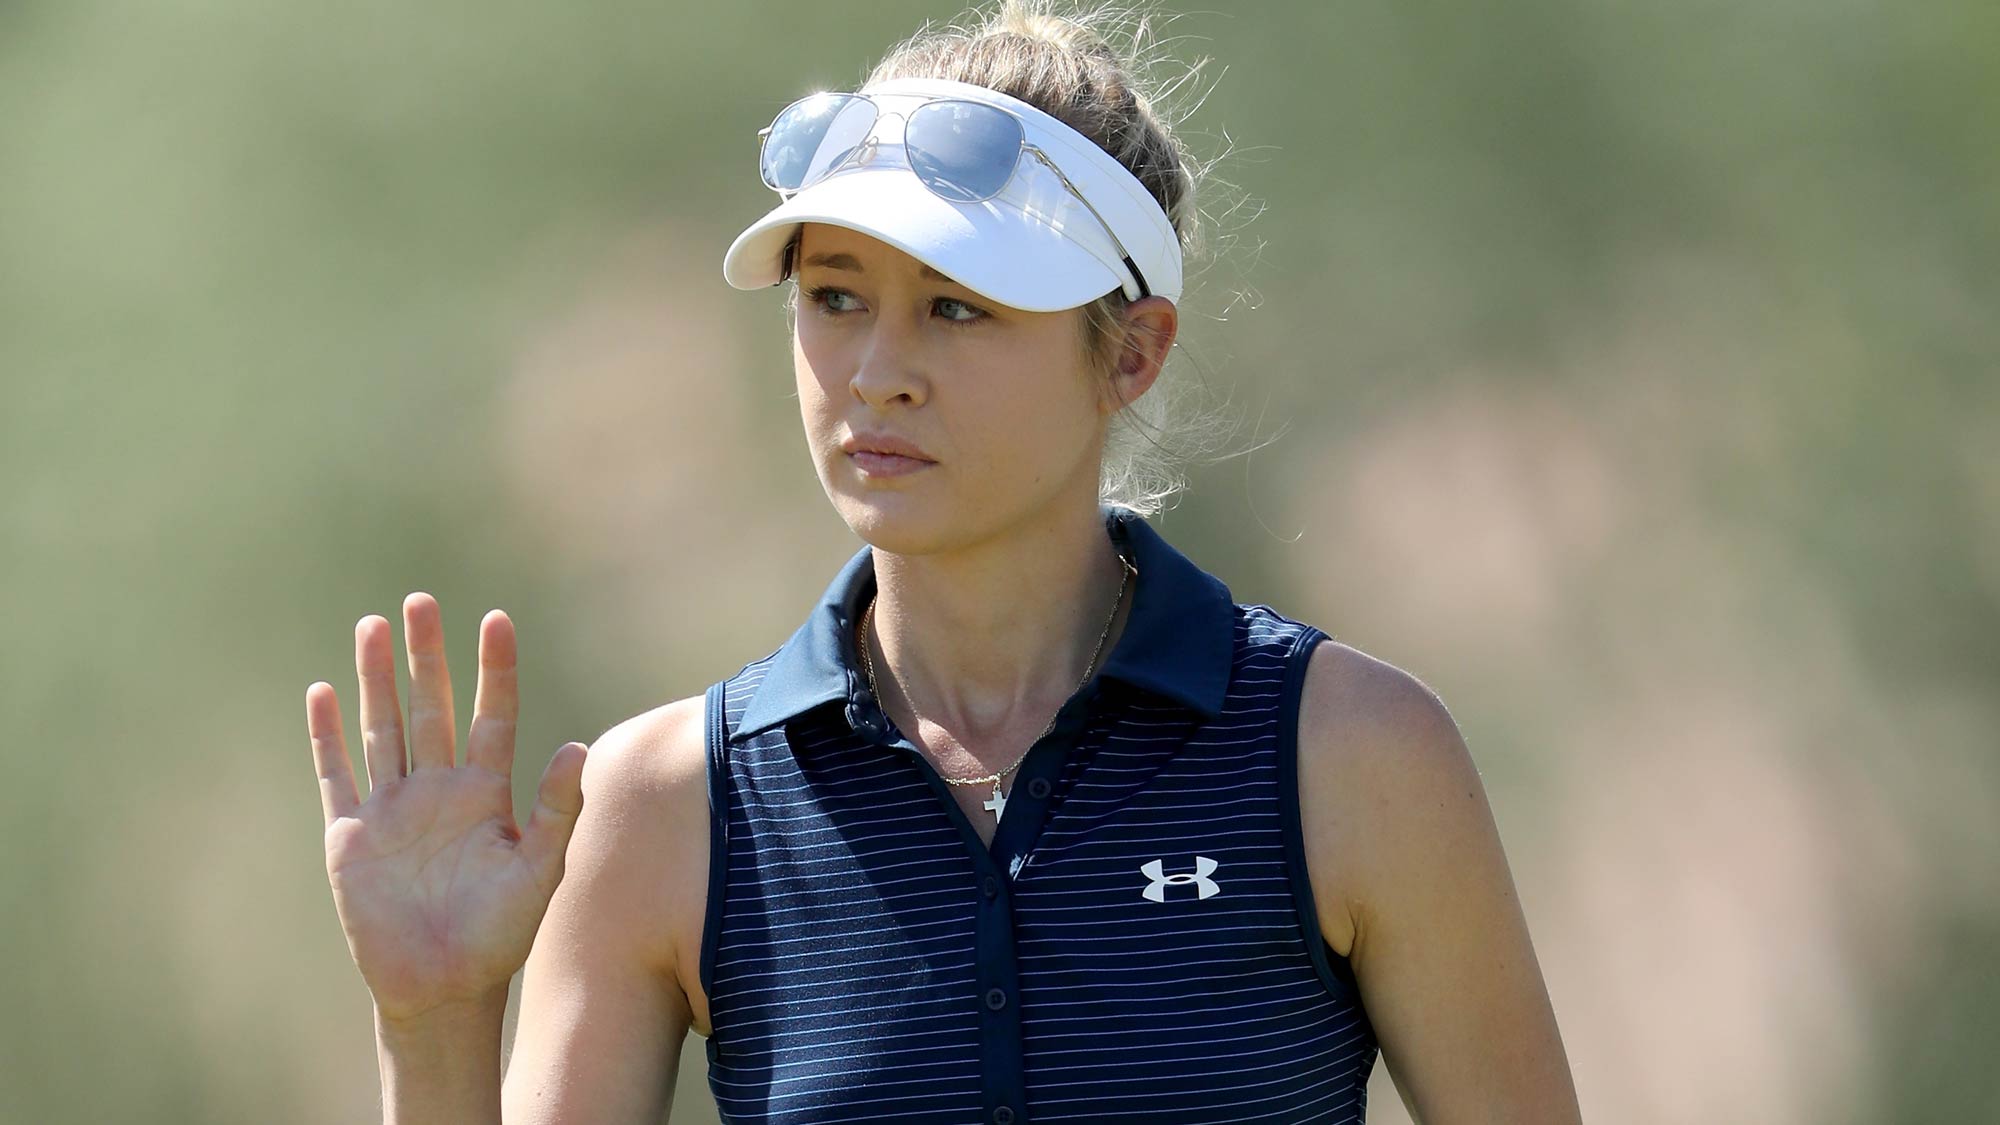 Nelly Korda Nabs A Top 10 In Thailand